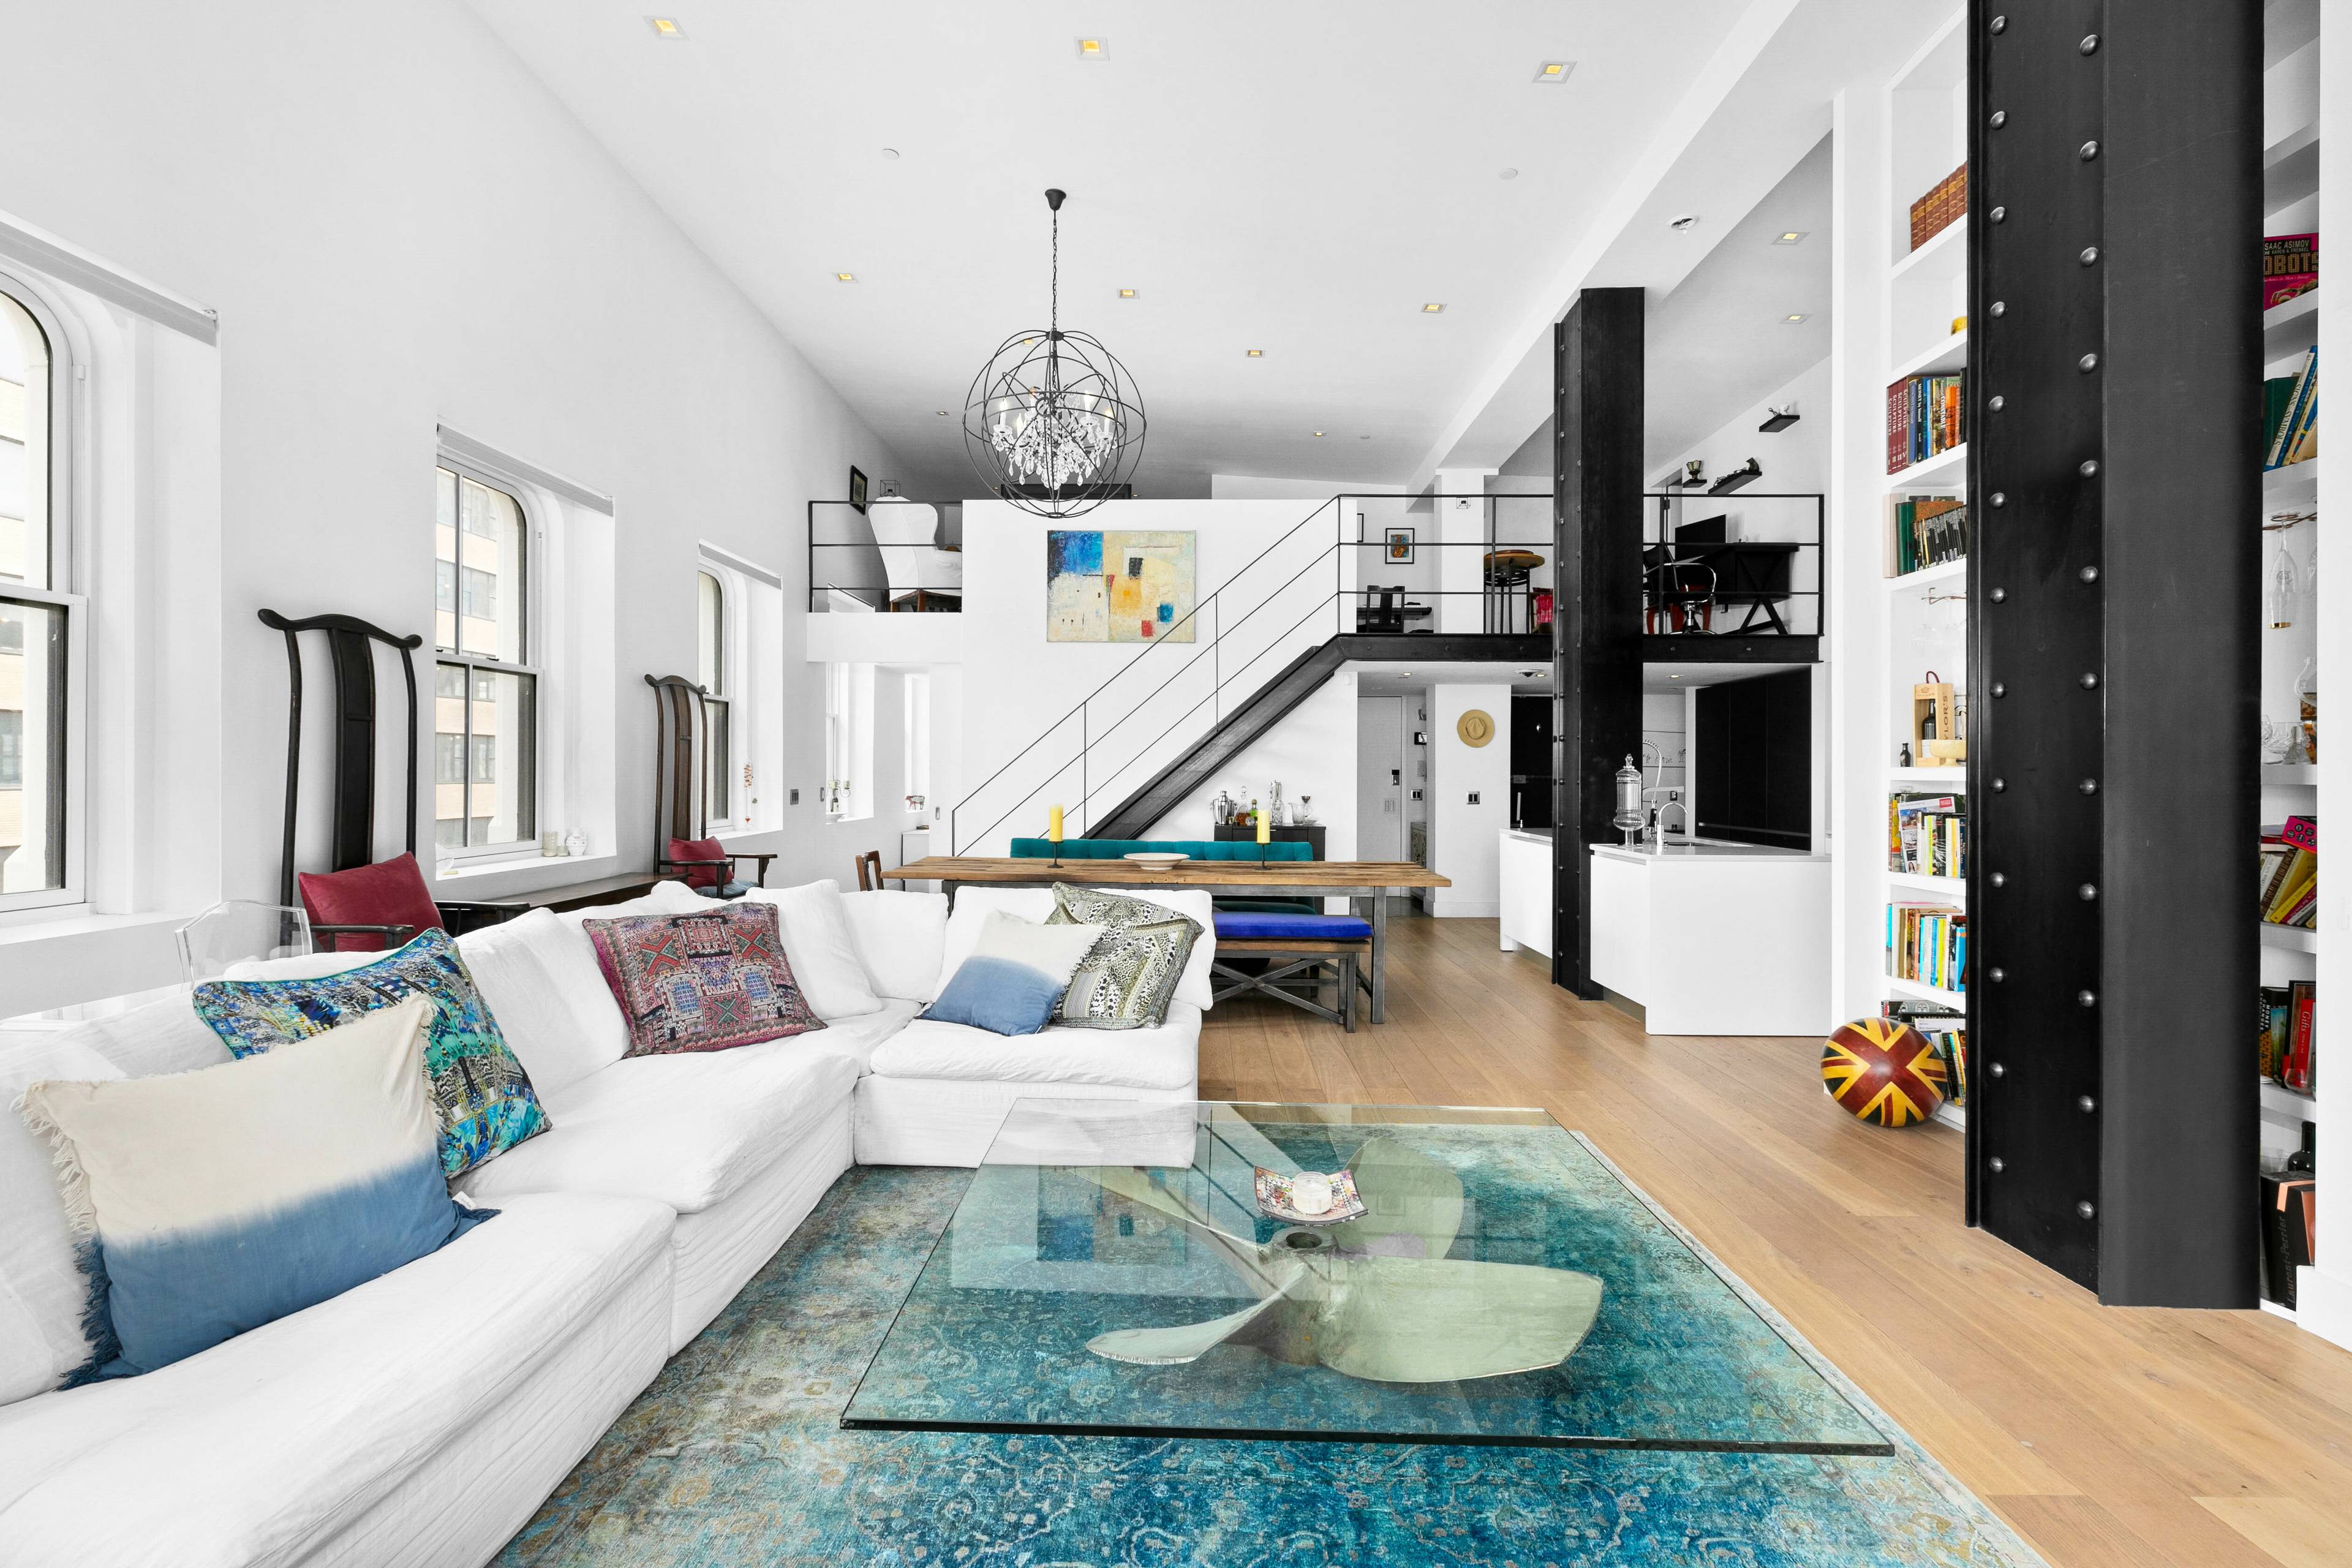 THIS IS IT ! Penthouse perfection in a boutique pre war Tribeca Condominium of only 4 residences.